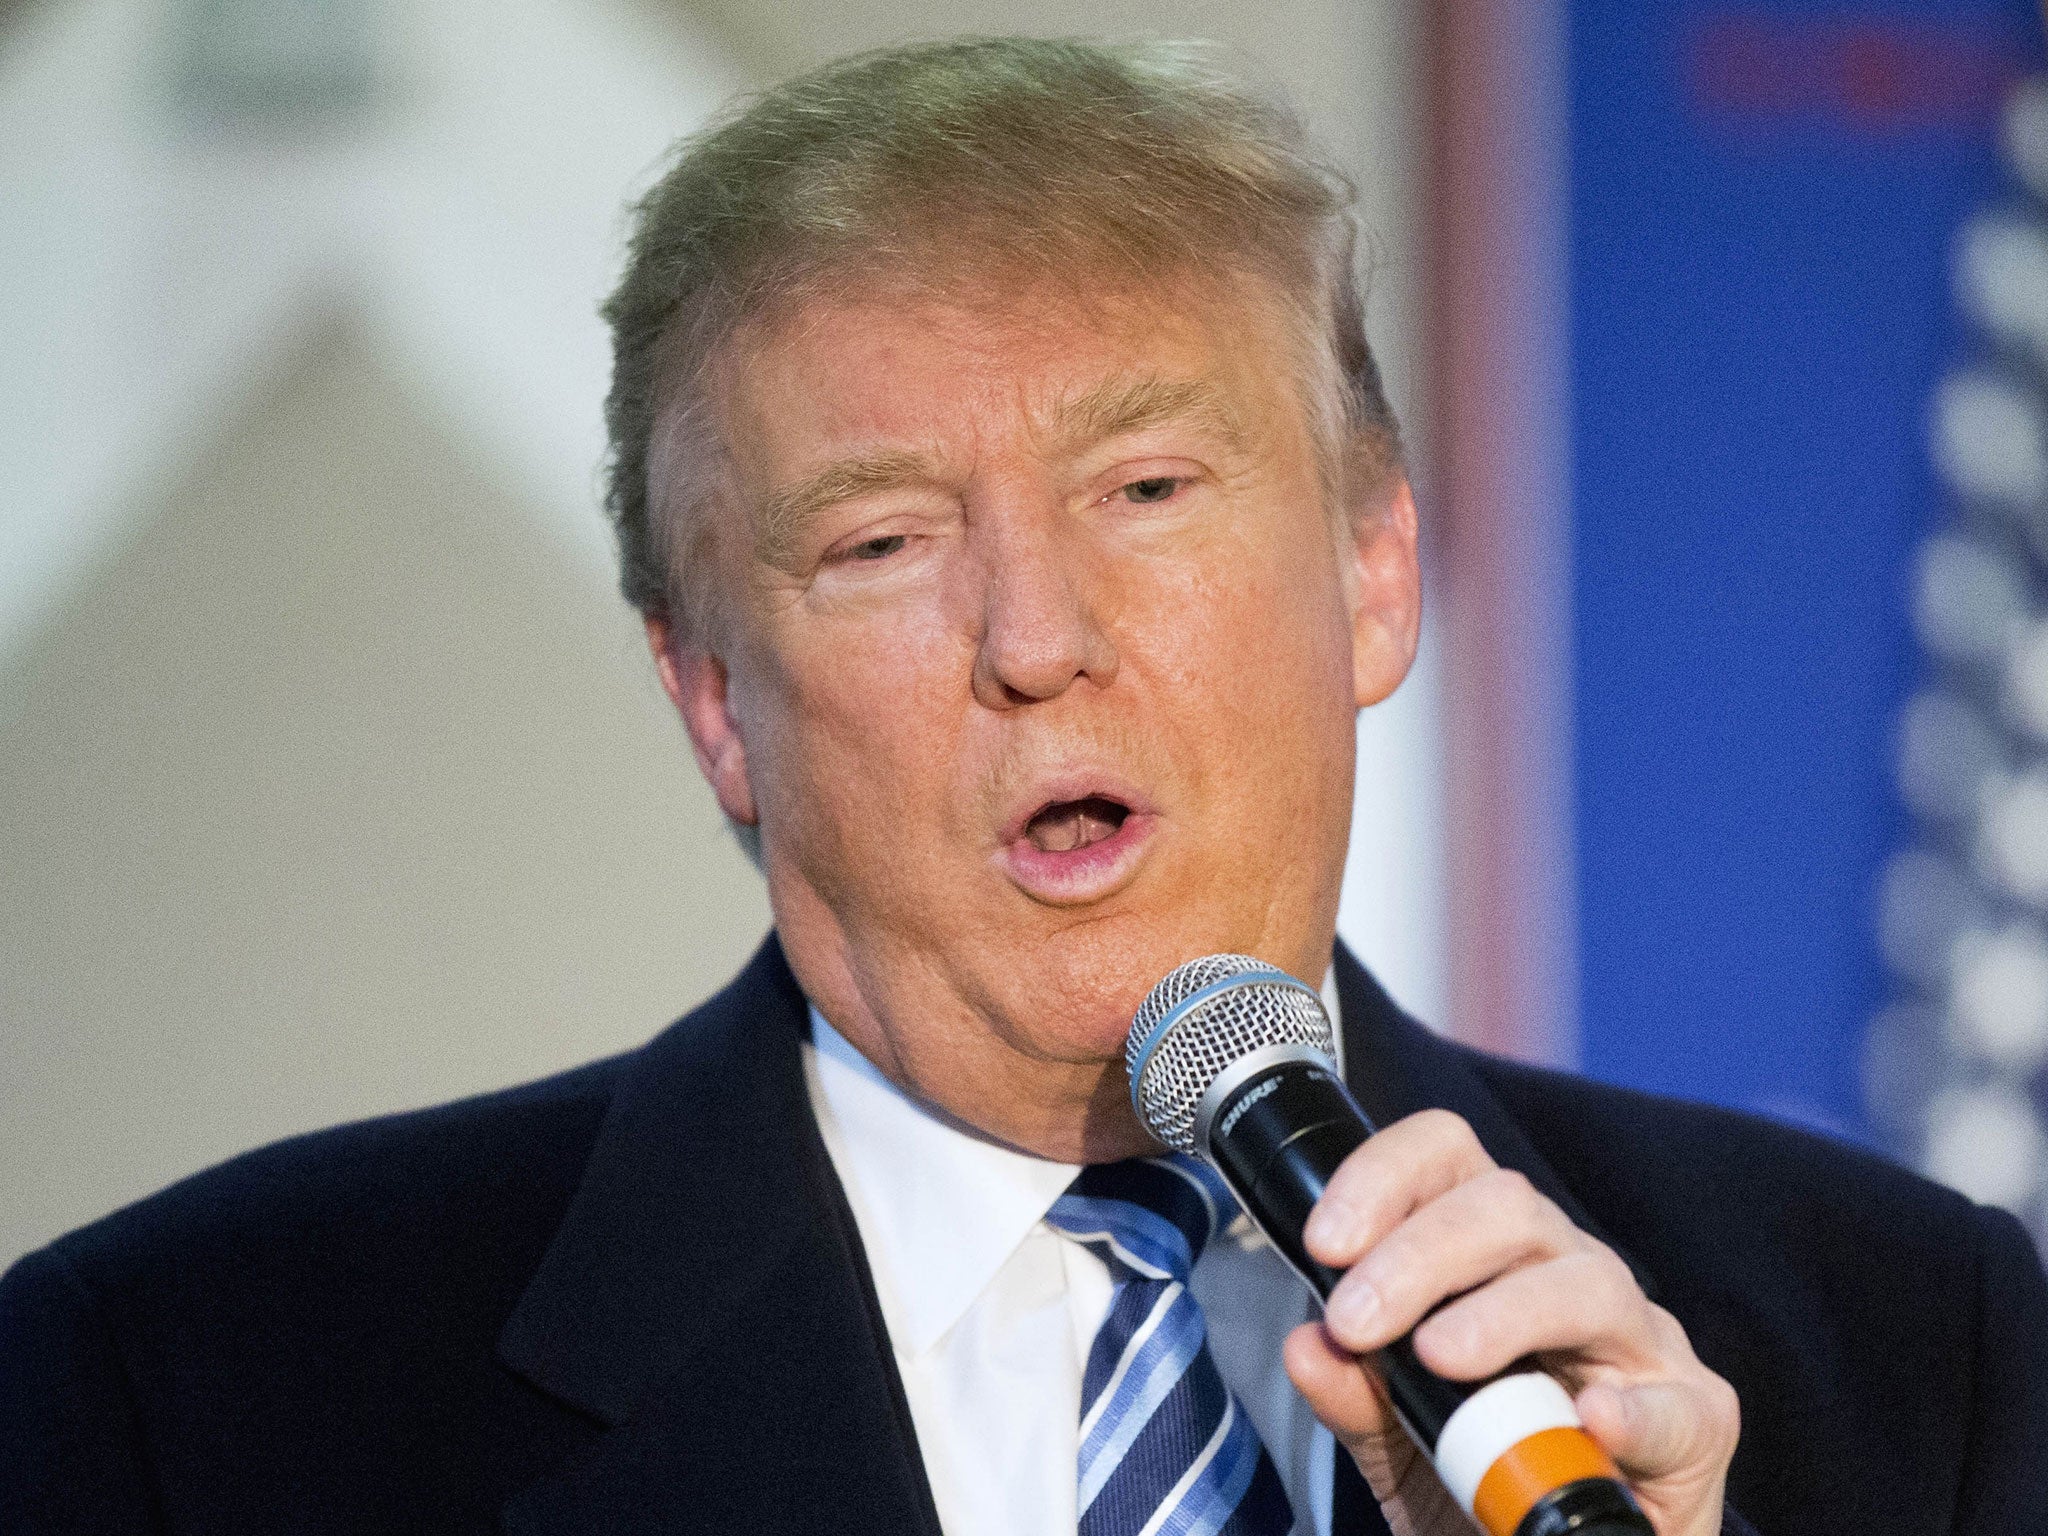 Mr Trump insisted he had the 'biggest heart in the room' when it came to Syrian refugees